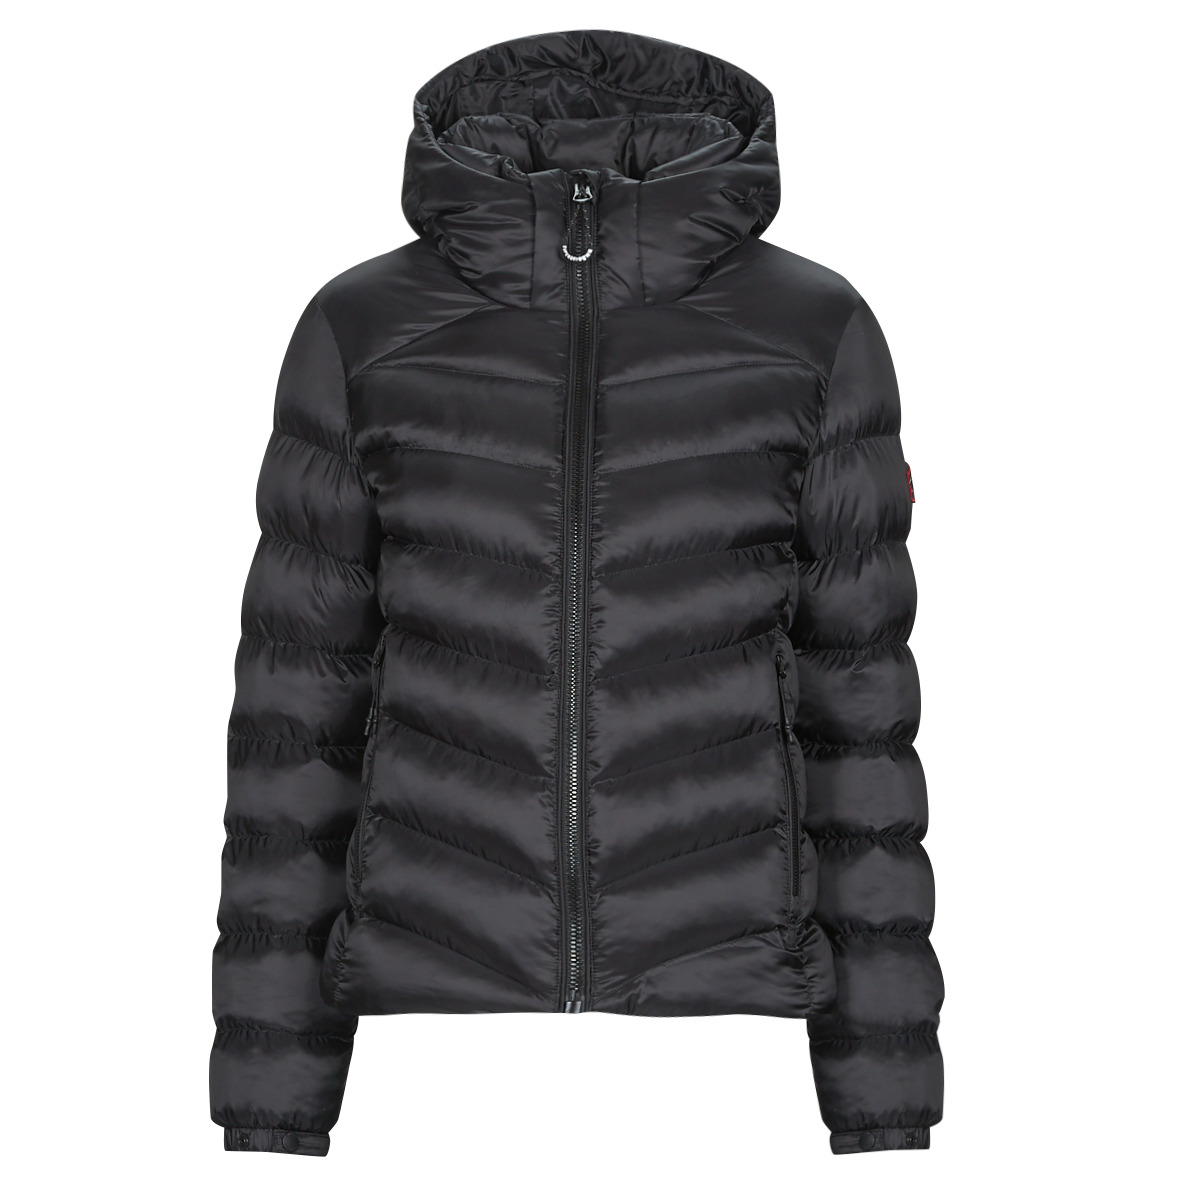 - Duffel JACKET HOODED Free Black Spartoo Clothing Women Superdry ! PADDED FUJI | NET coats delivery -